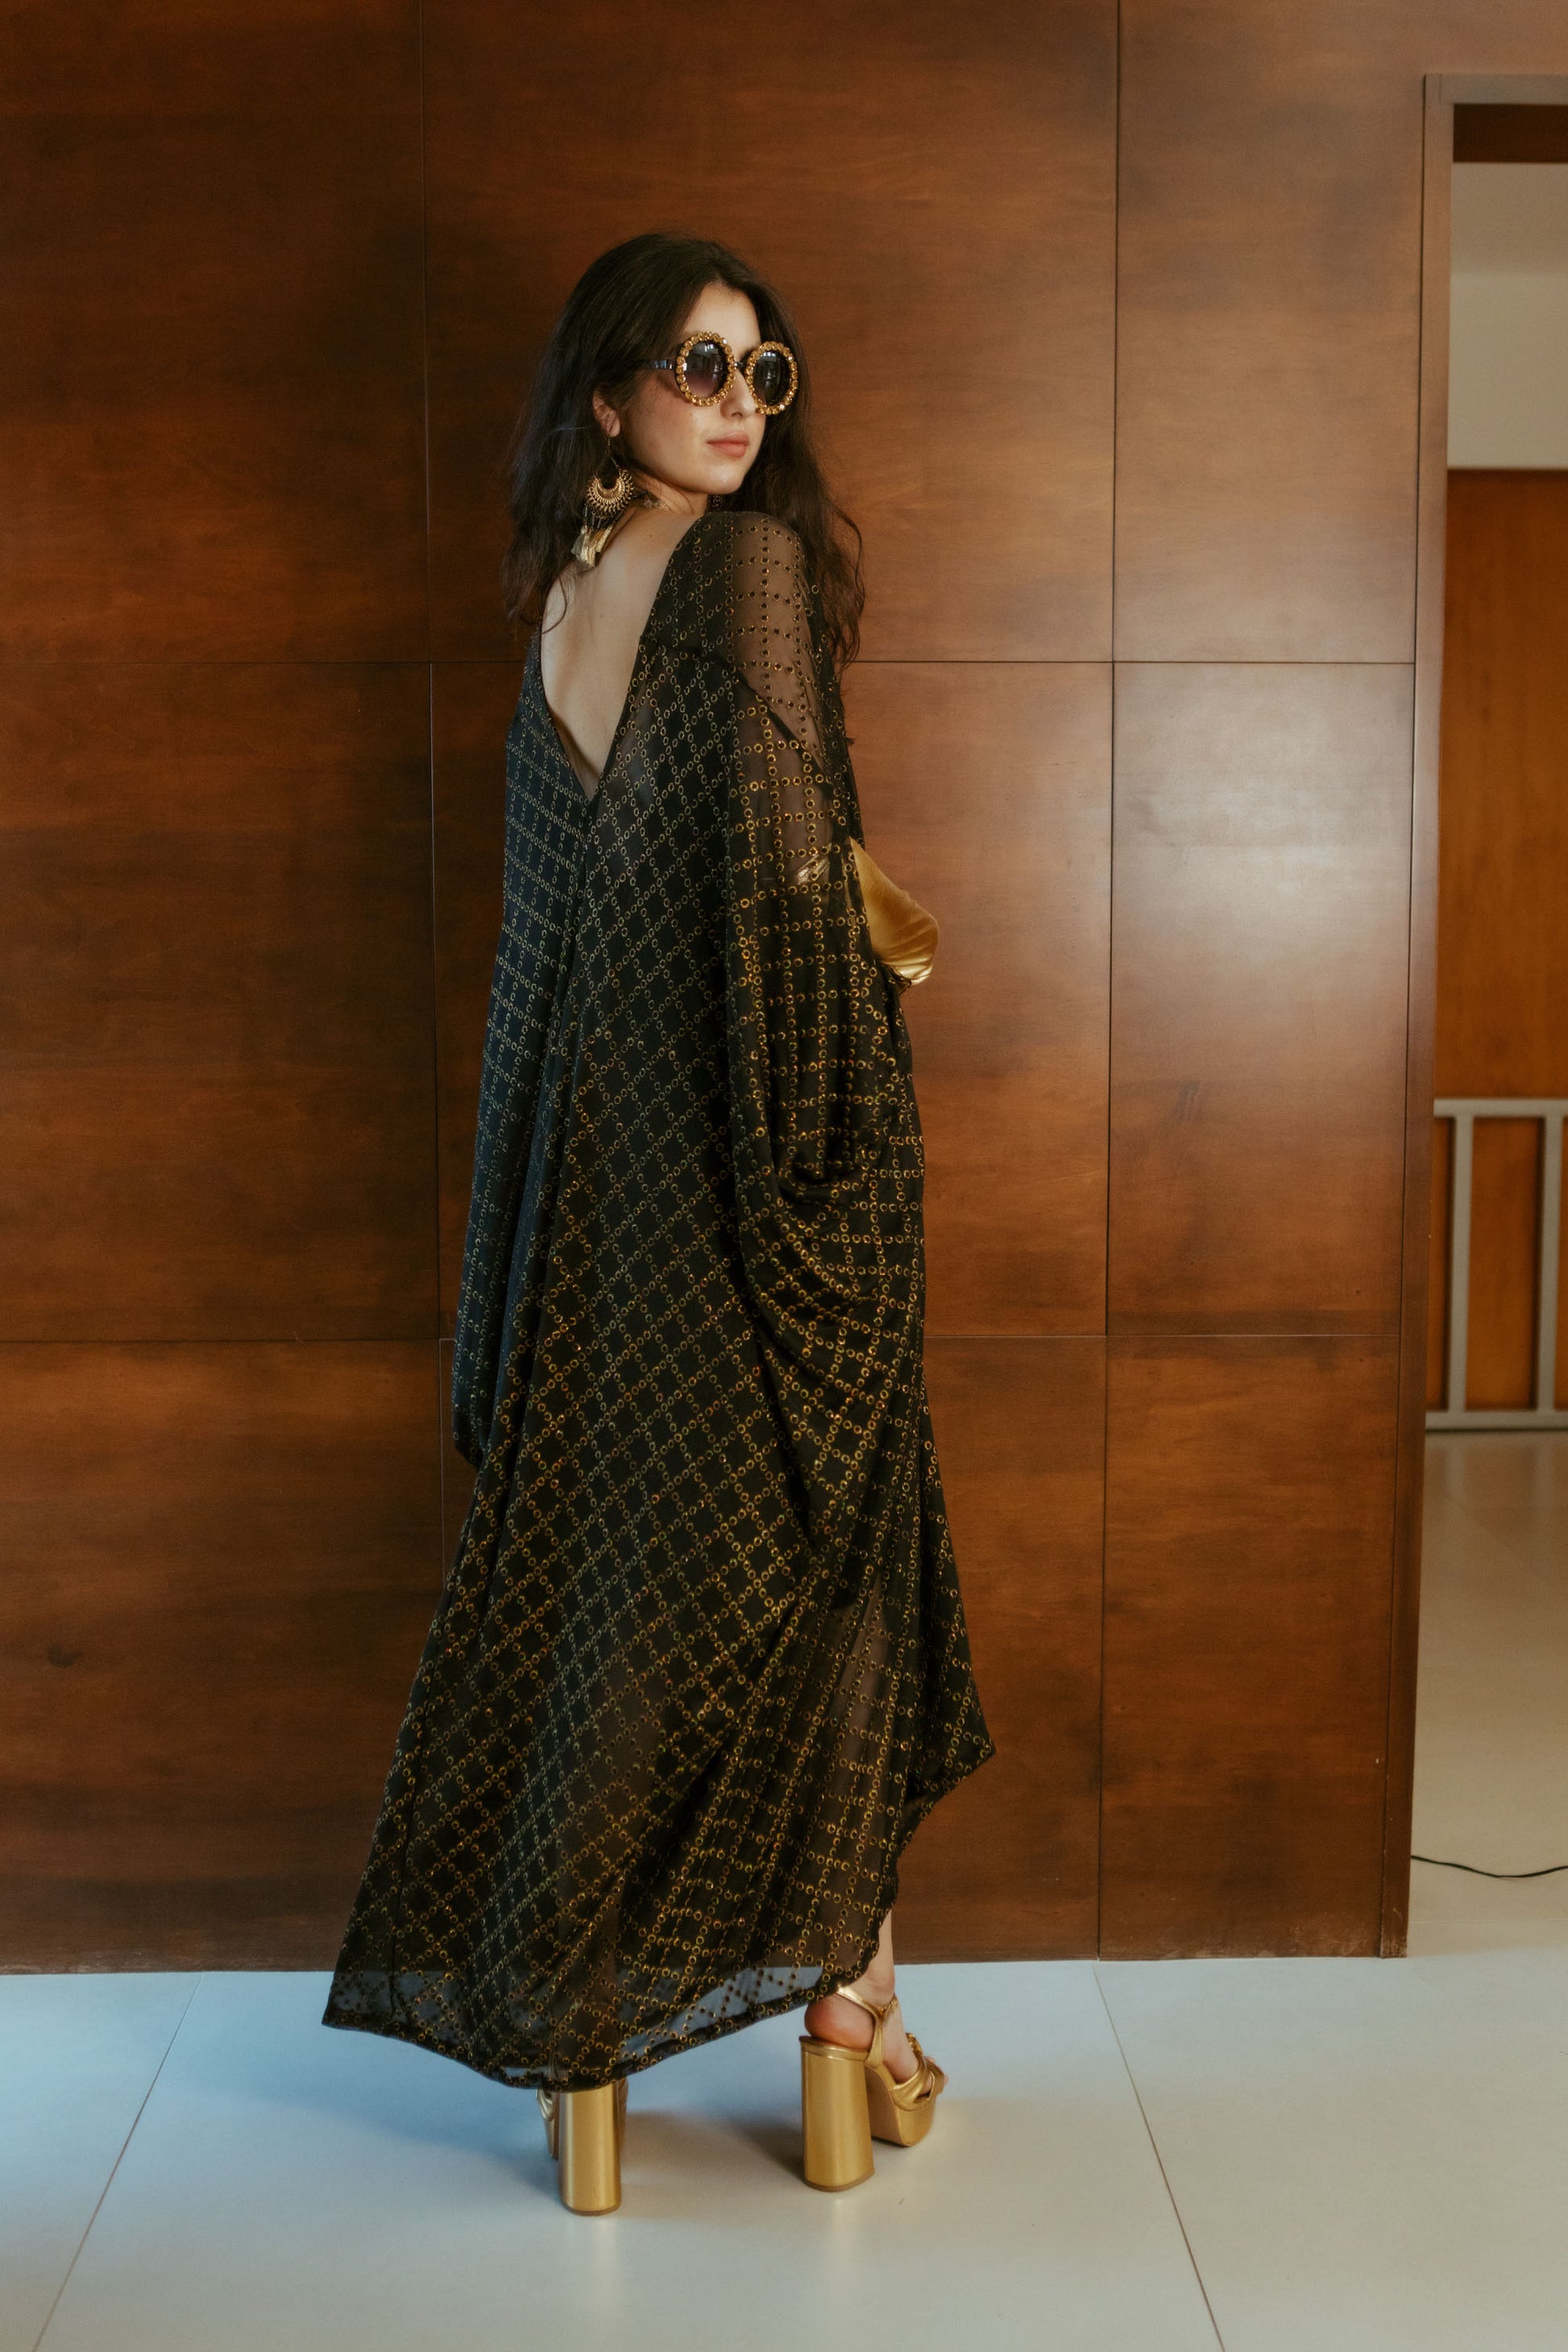 Black, sheer mesh caftan dress embellished with shimmering metallic gold circles in a geometric pattern that creates a sort of chain-link effect. Featuring a deep v-neckline, short batwing sleeves, and an ankle-length hem. This caftan is a voluminous garment that gives a flowy silhouette that drapes beautifully on all shapes.